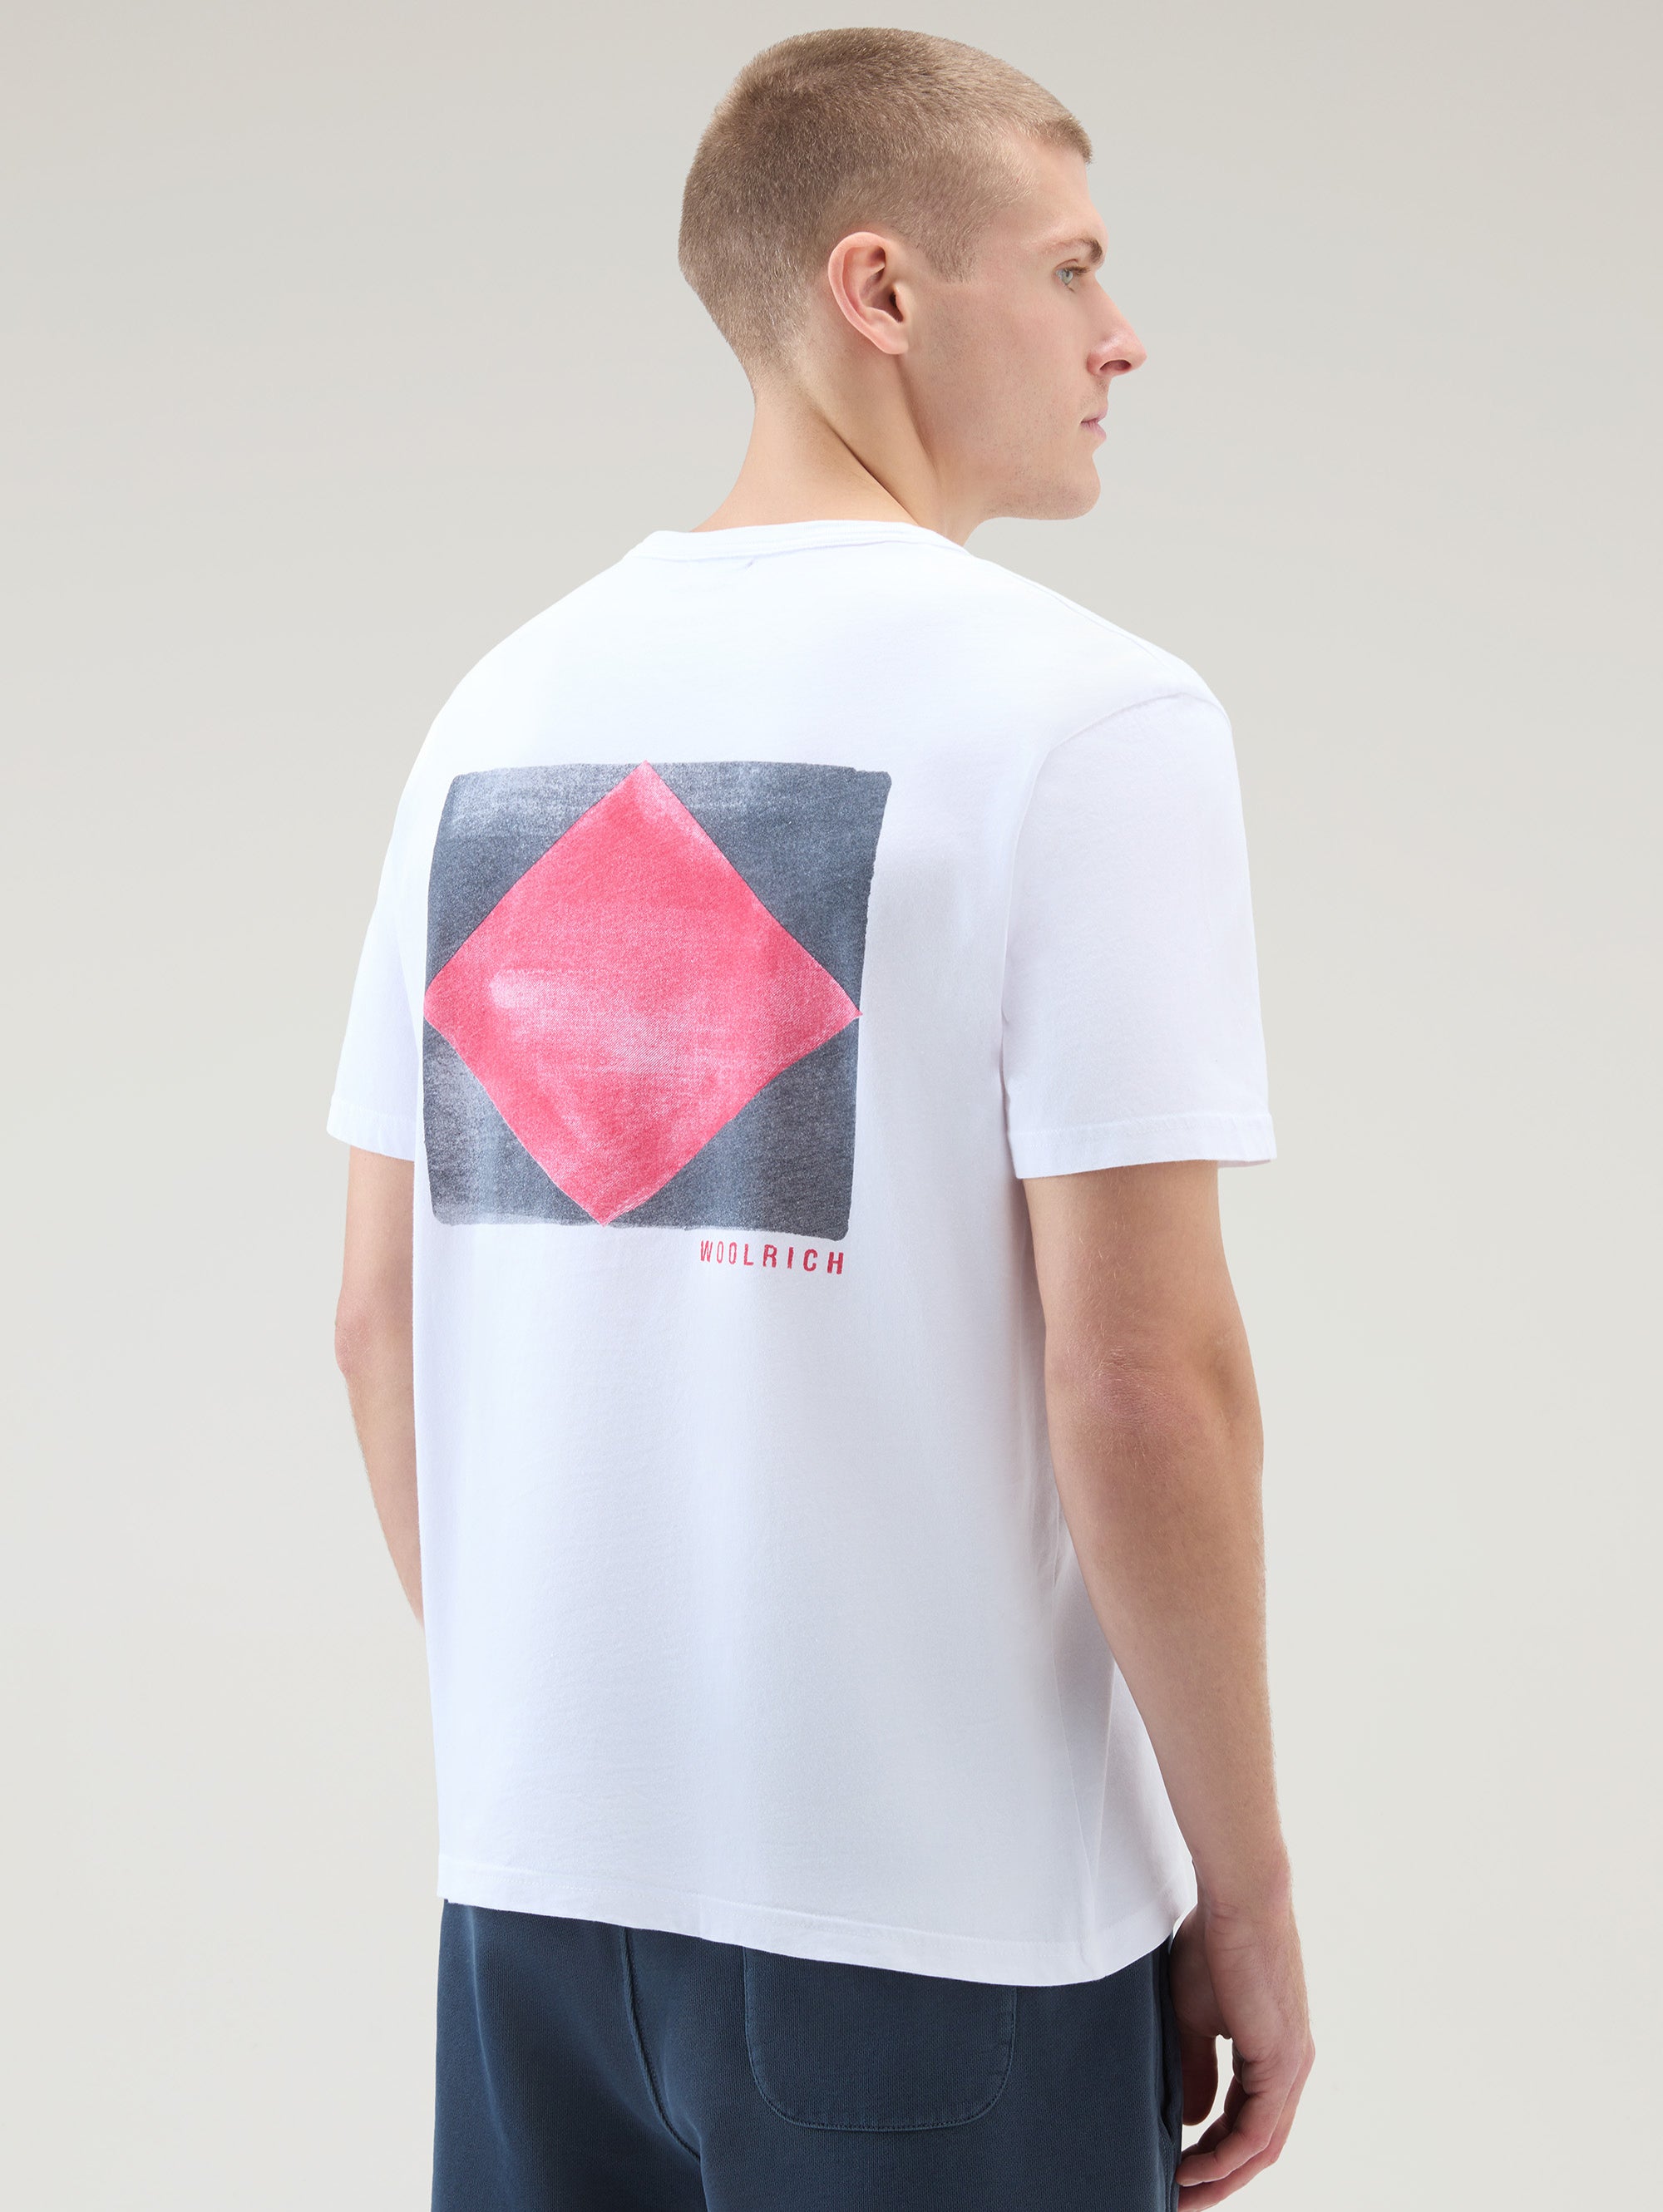 Jersey T-shirt with White Pocket